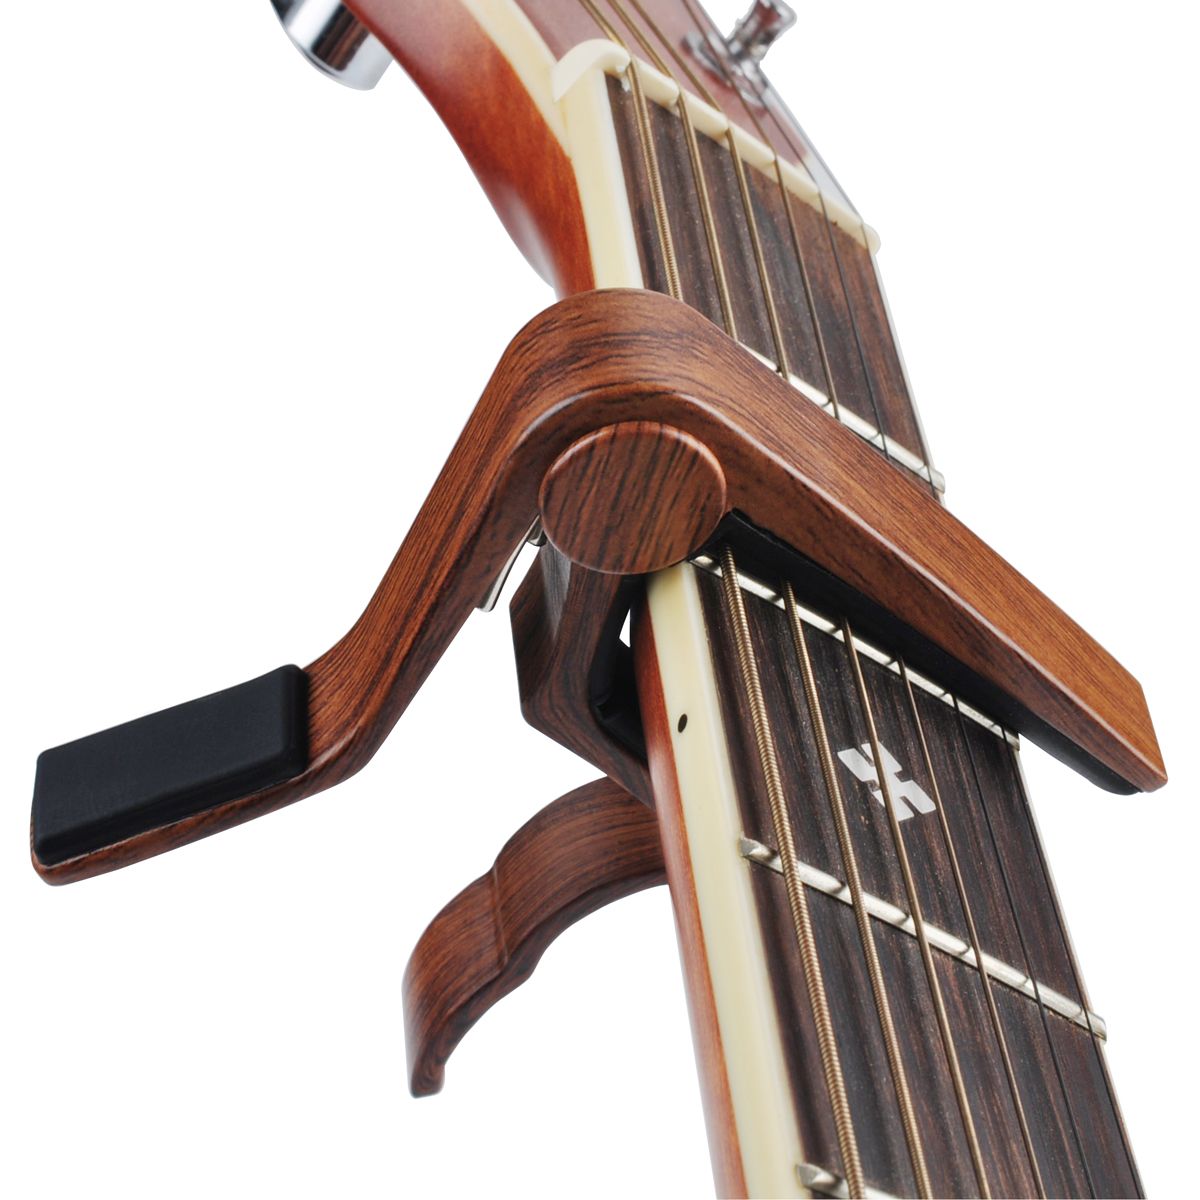 Vbest life Quick Changing Alloy Capo for 6-String Folk Classic Guitar and Acoustic Guitars Ukulele and More 3 Colors 